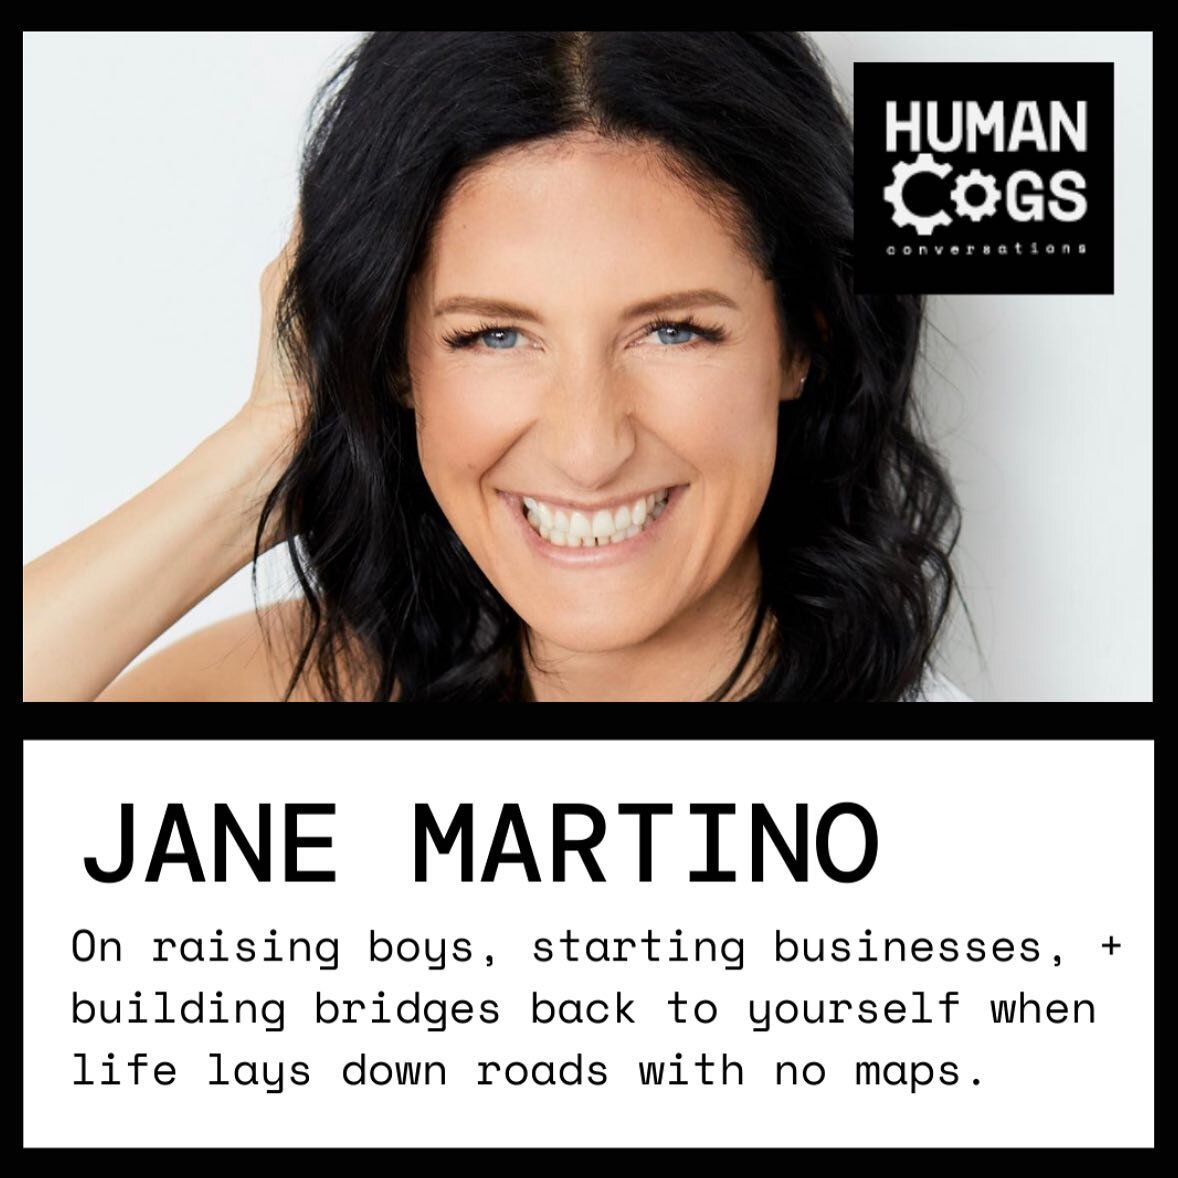 #HumanCogs 
#JaneMartino @smilingmind EPISODE 
🎙🧠🎧 LISTEN NOW! 

In our last episode we featured Matt Martino, who shared his story of refinding himself when his marriage fell apart.

In this episode, we talk to his ex-wife Jane Martino - a polyma